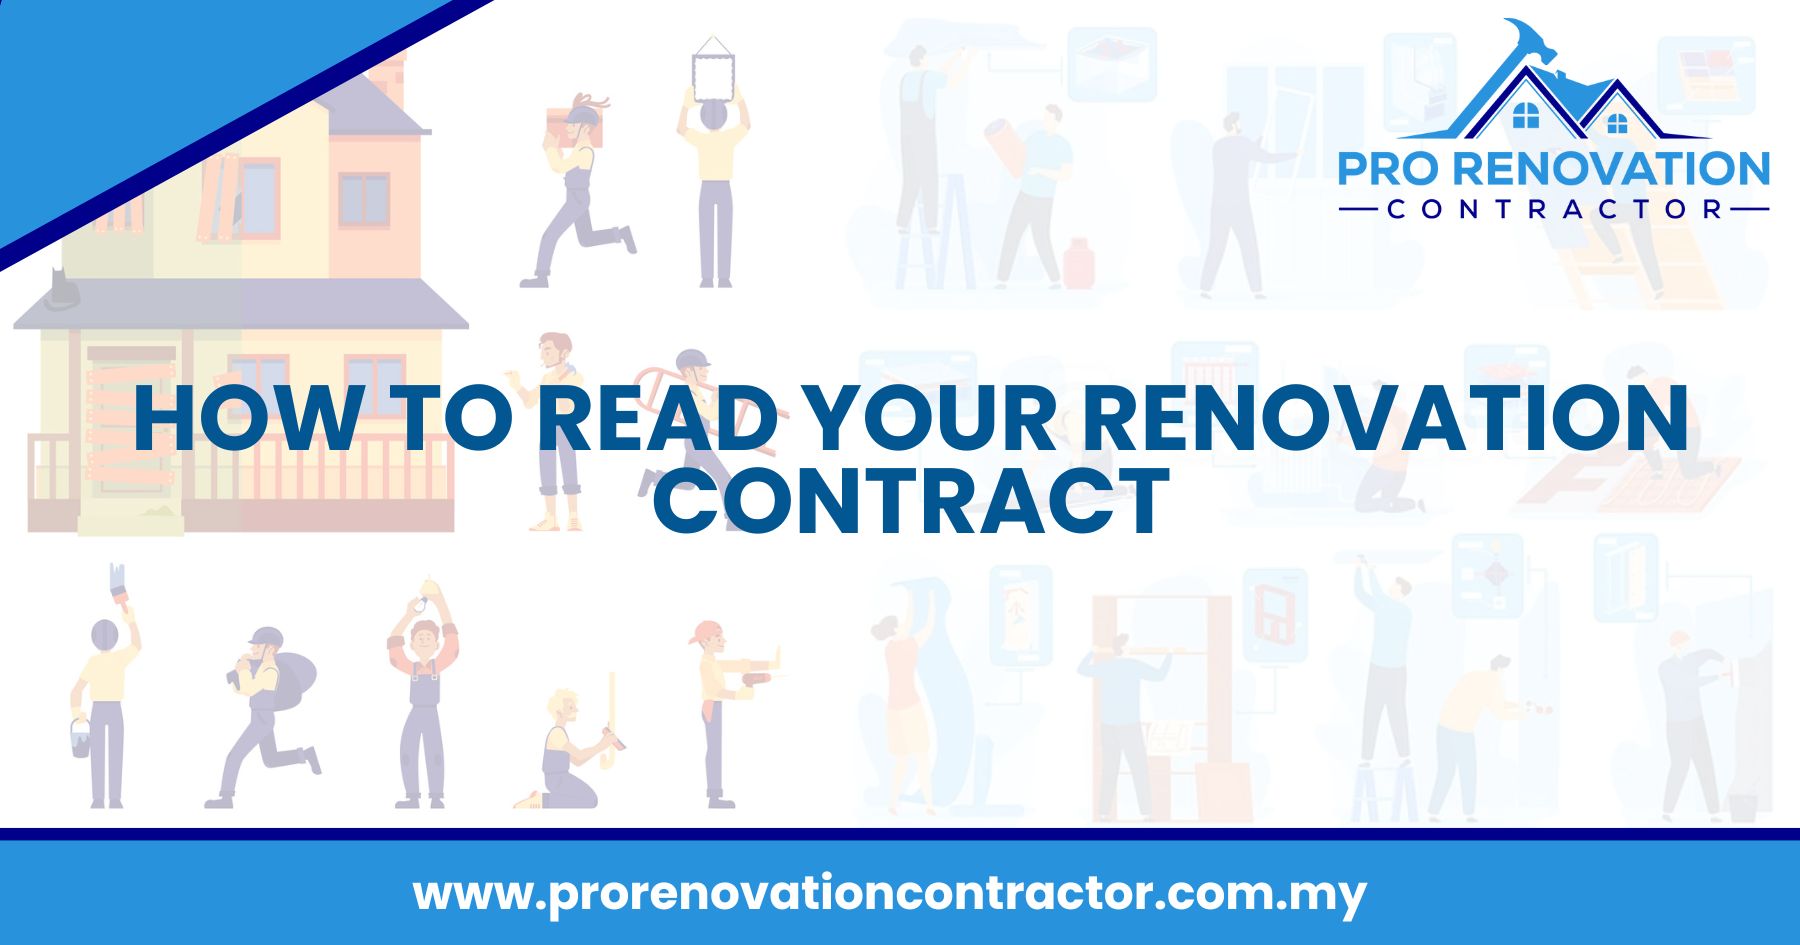 How To Read Your Renovation Contract